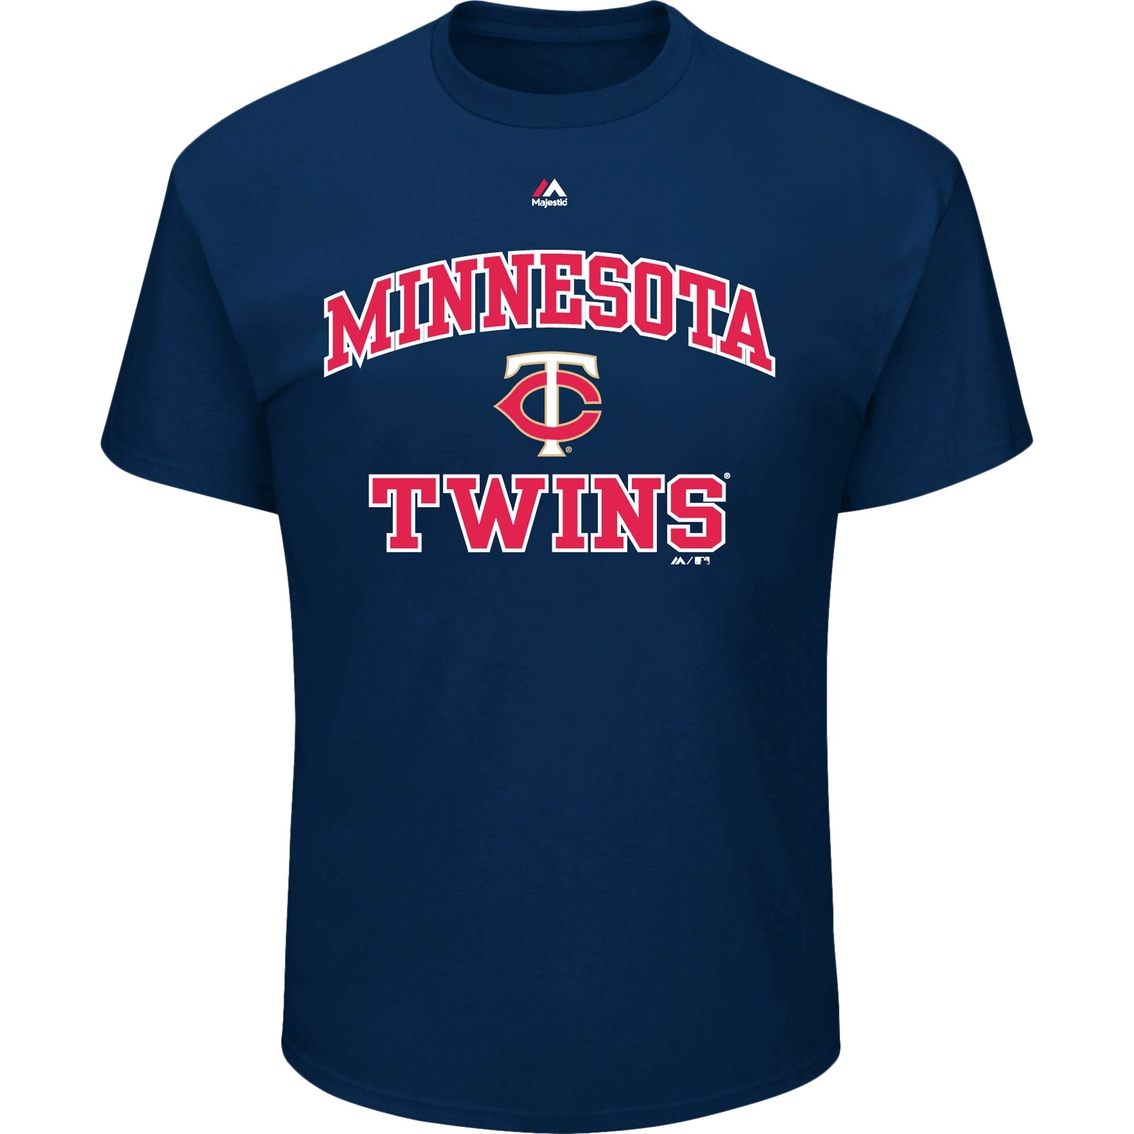 Majestic Athletic MLB Minnesota Twins Heart and Soul Tee - Image 2 of 3